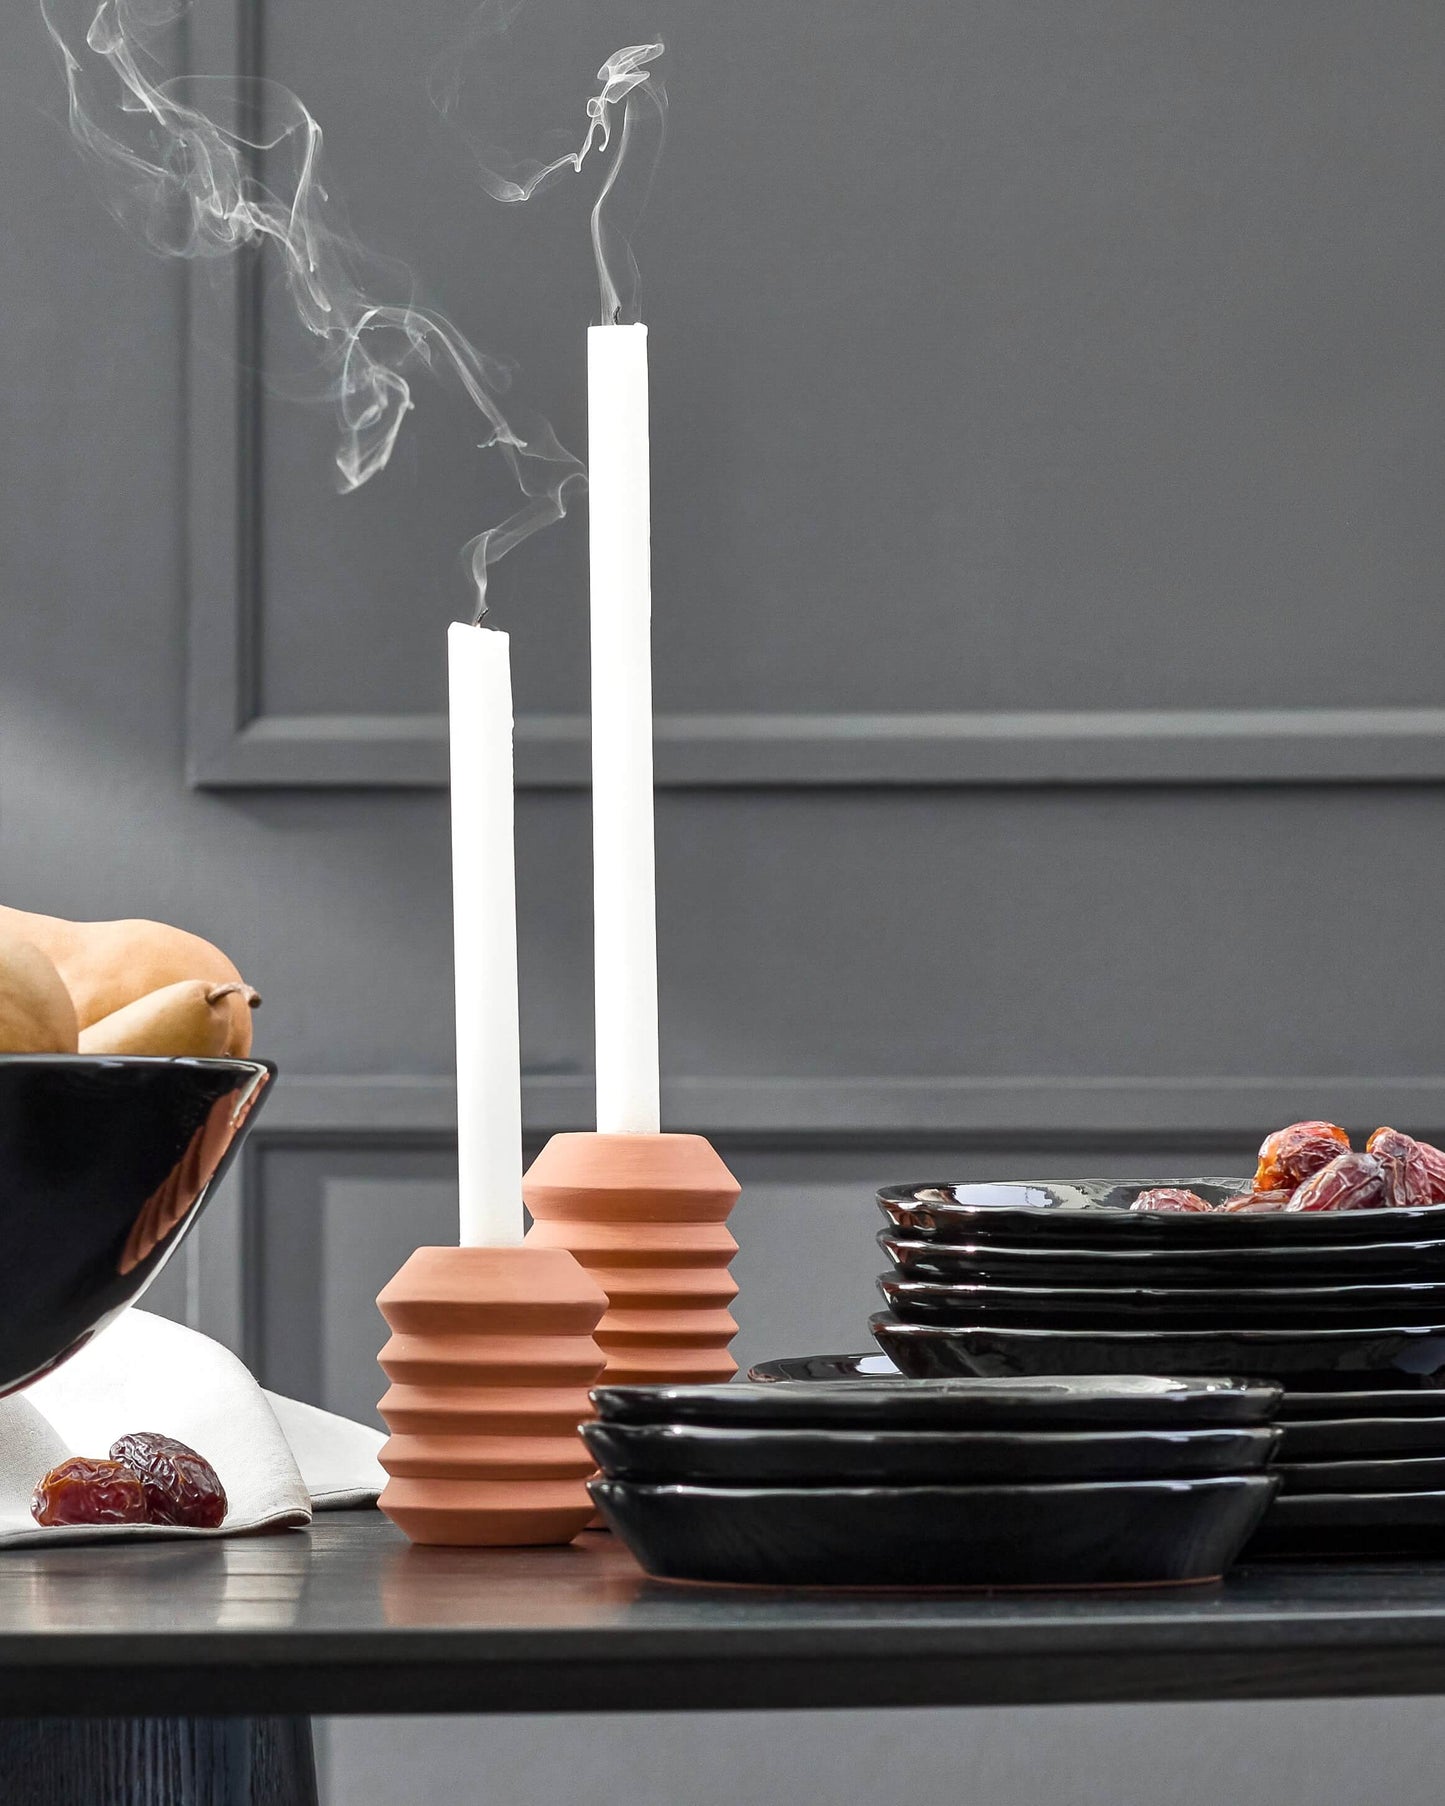 Fall holiday tableware against dark gray wall. Modern dinnerware and handmade clay candle holders.